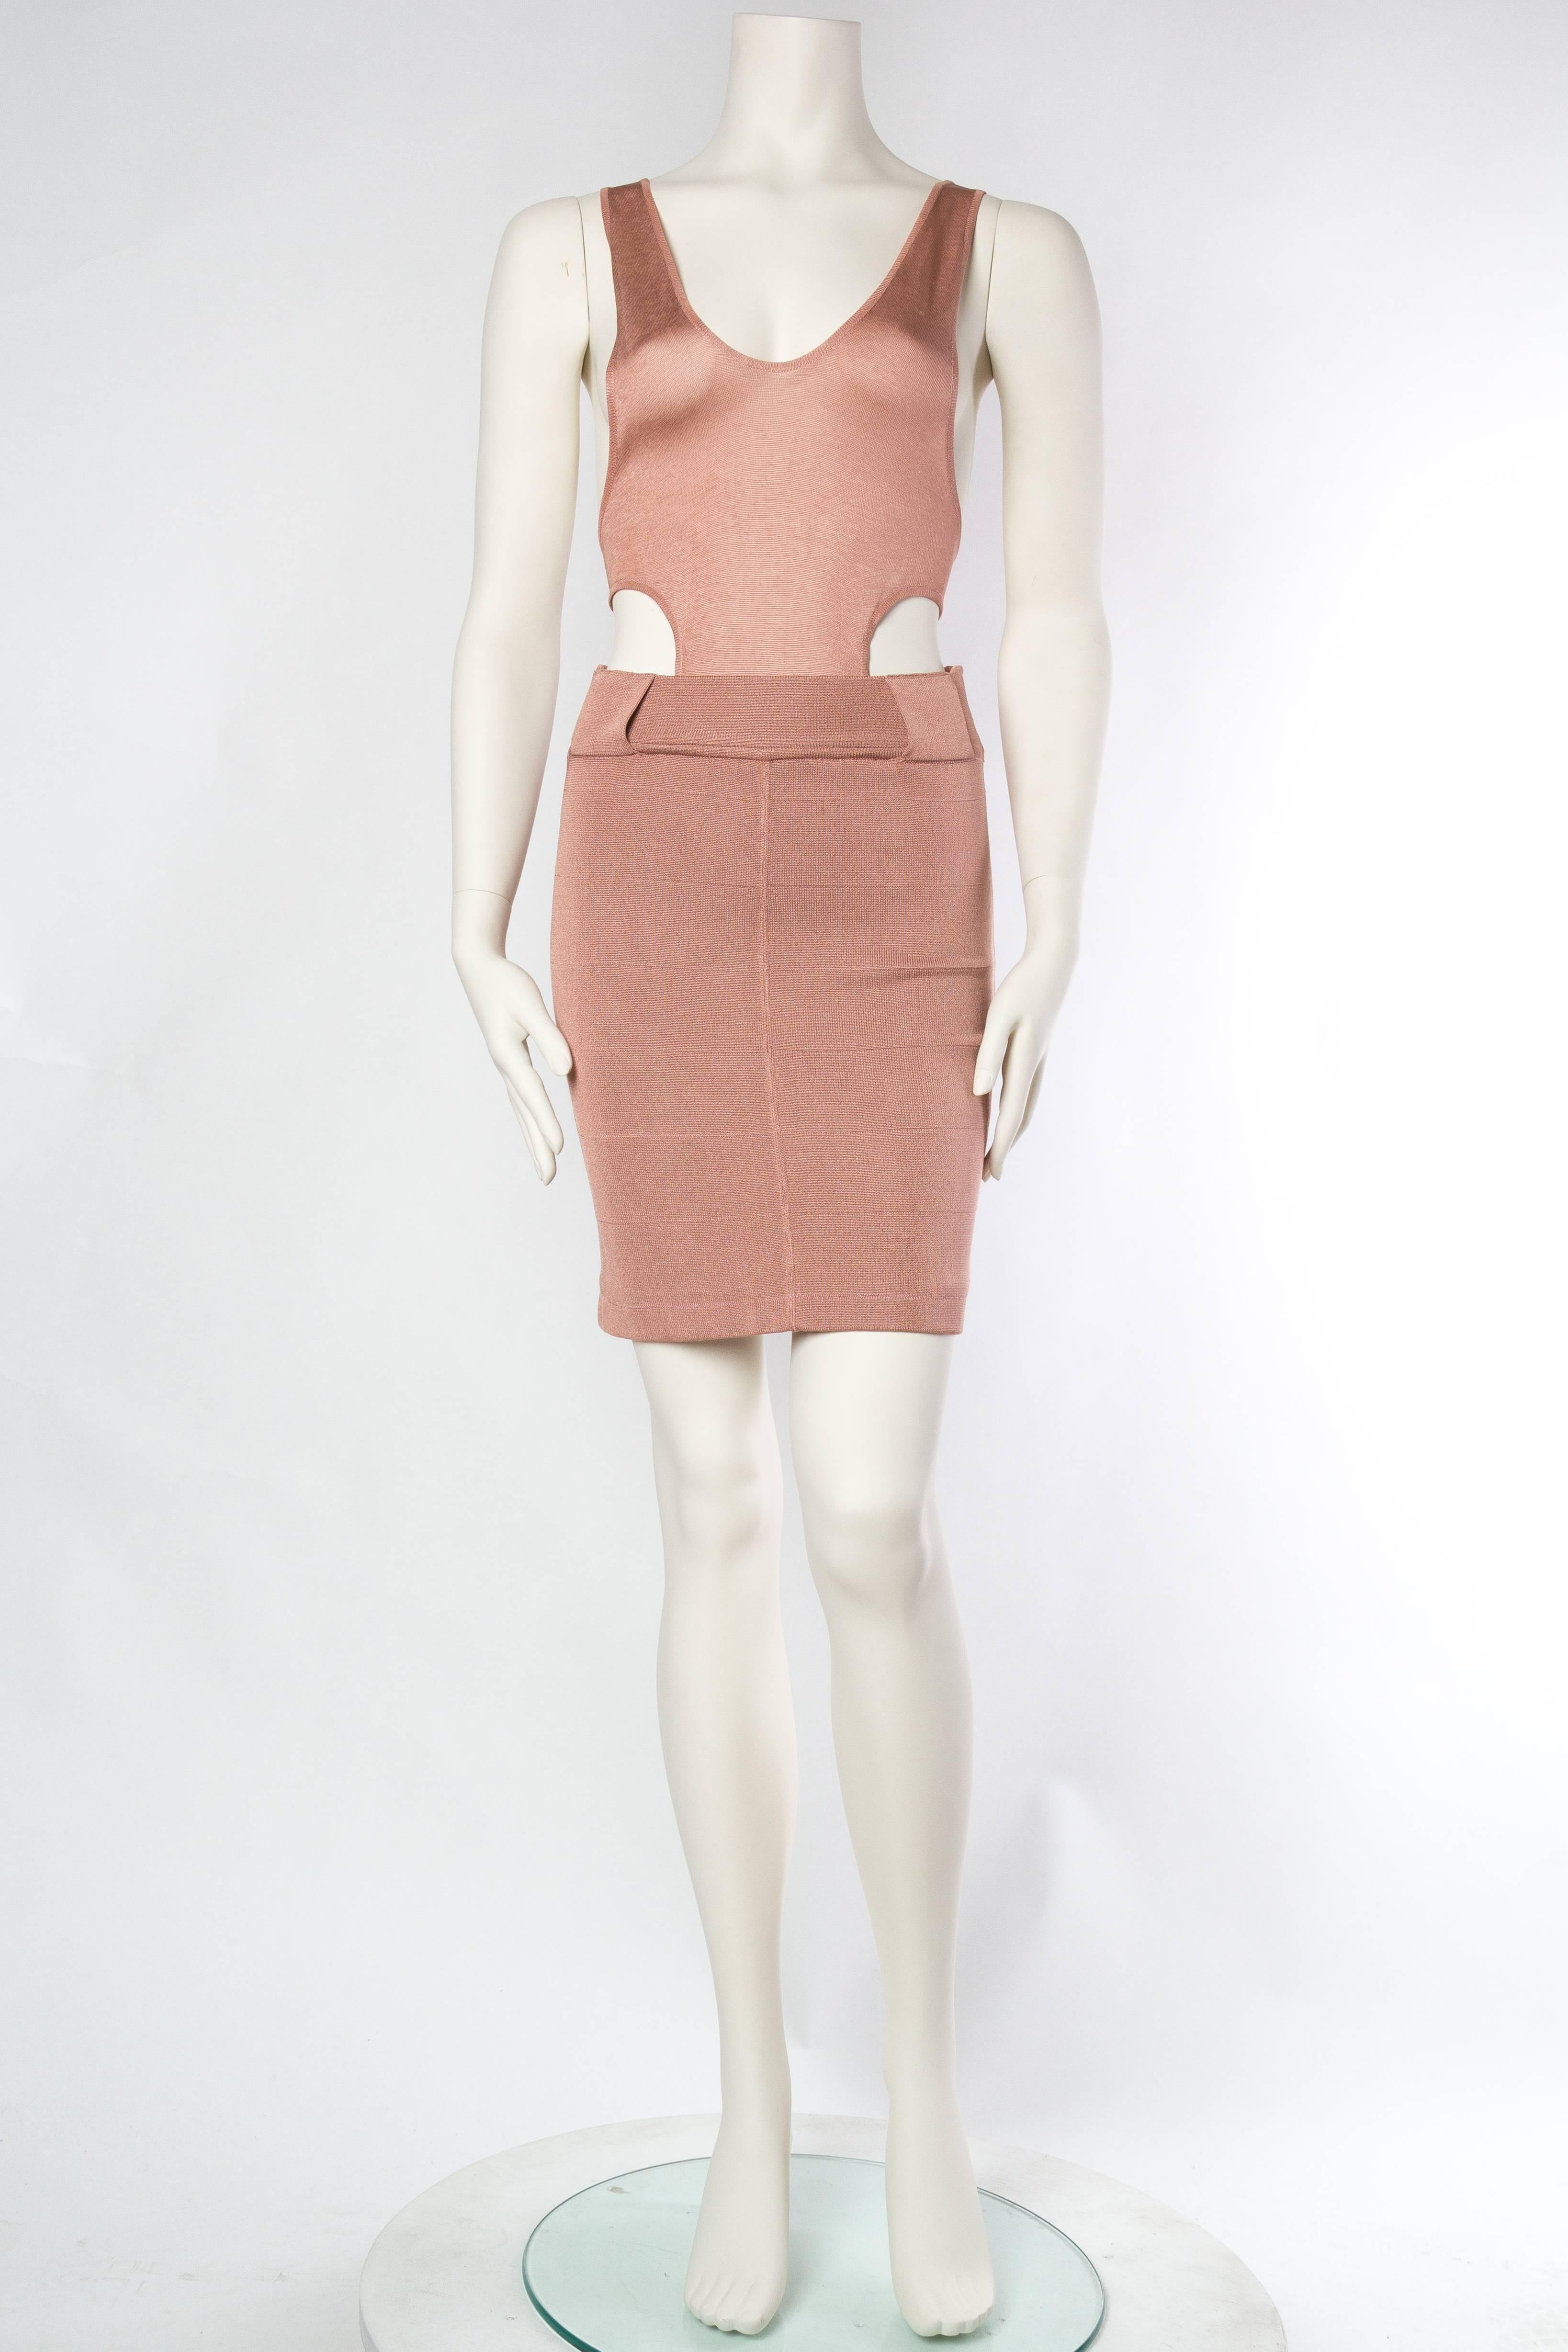 1990 ALAIA Blush Pink Rayon Jersey Bodycon Cocktail Dress With Cut Out Racer Back